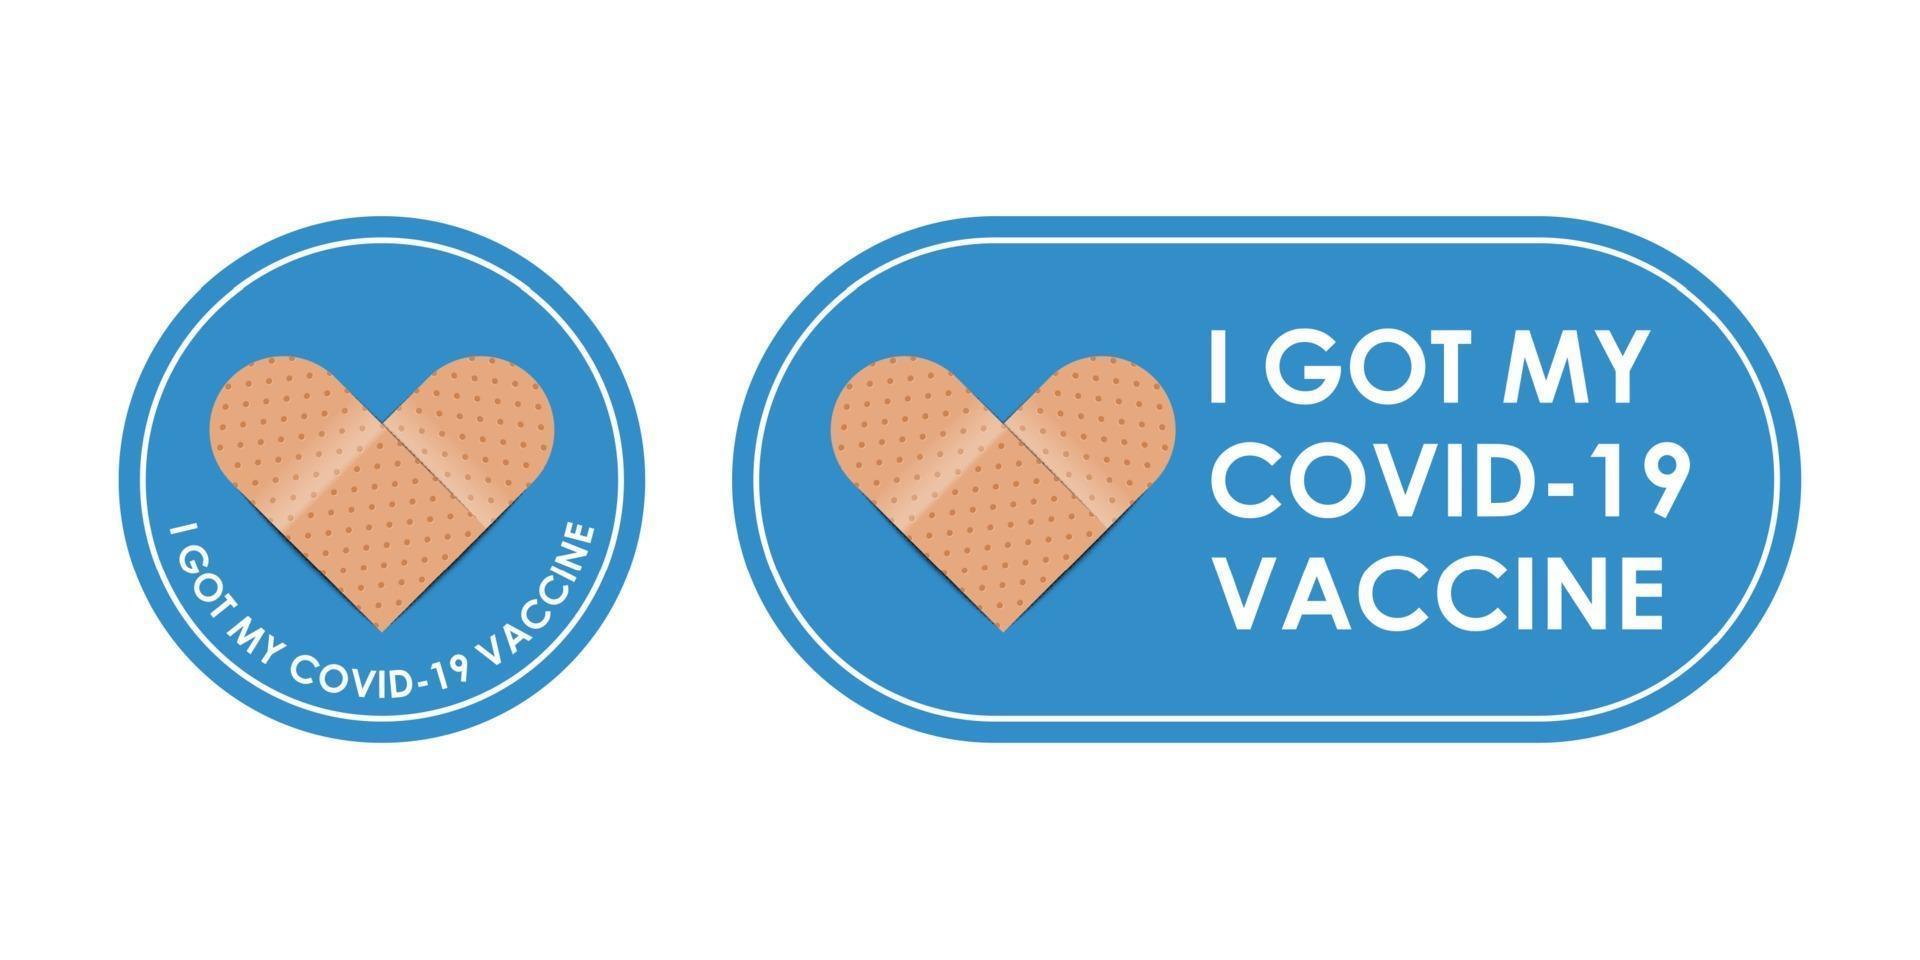 Vaccinated bandages icon with quote - I got covid 19 vaccine vector